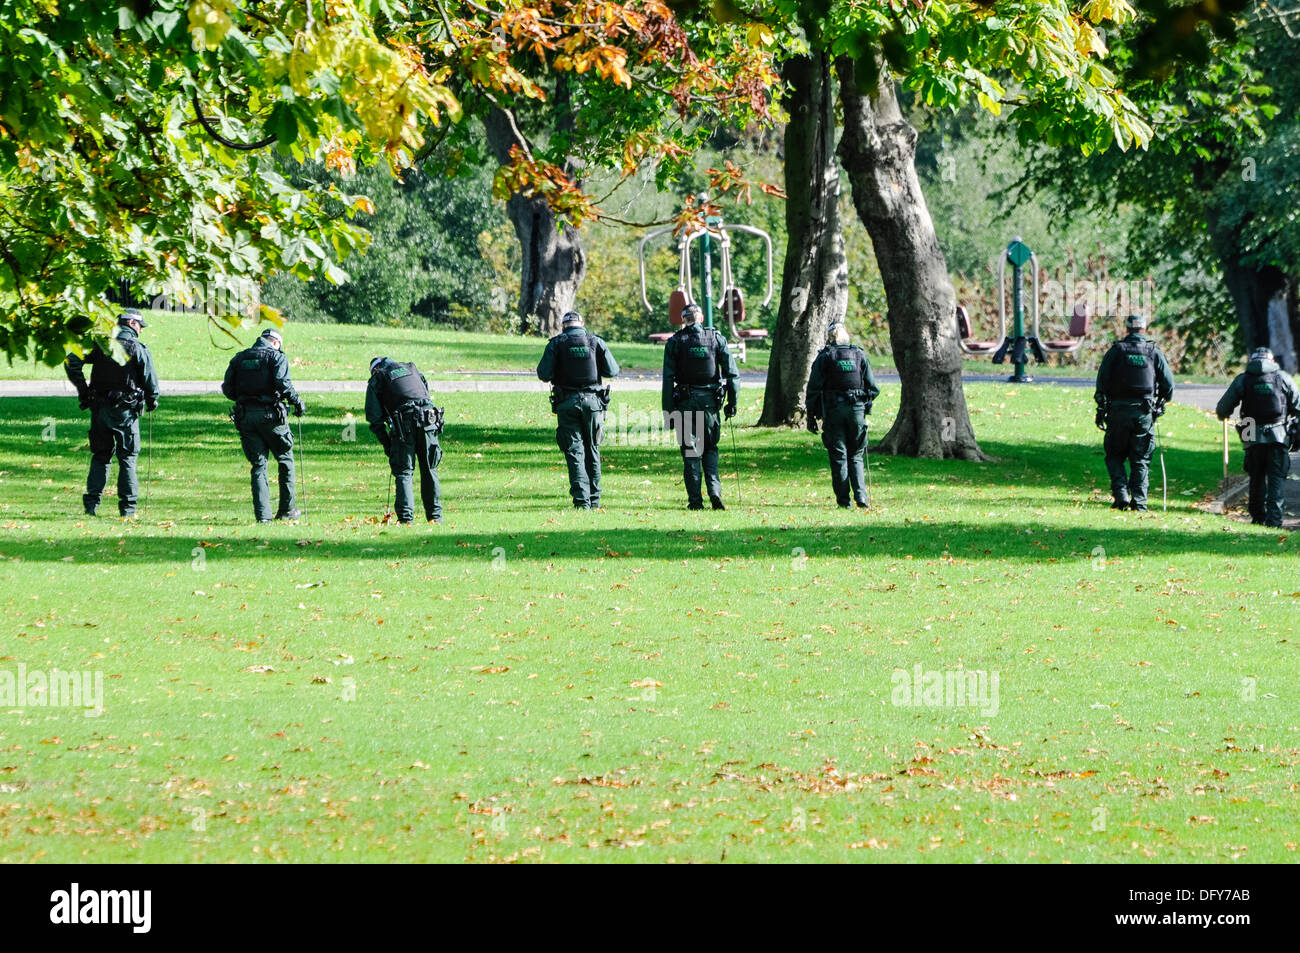 Belfast, Northern Ireland, UK. 10th Oct 2013 - PSNI officers conduct a thorough search of an area of grass in a park Stock Photo